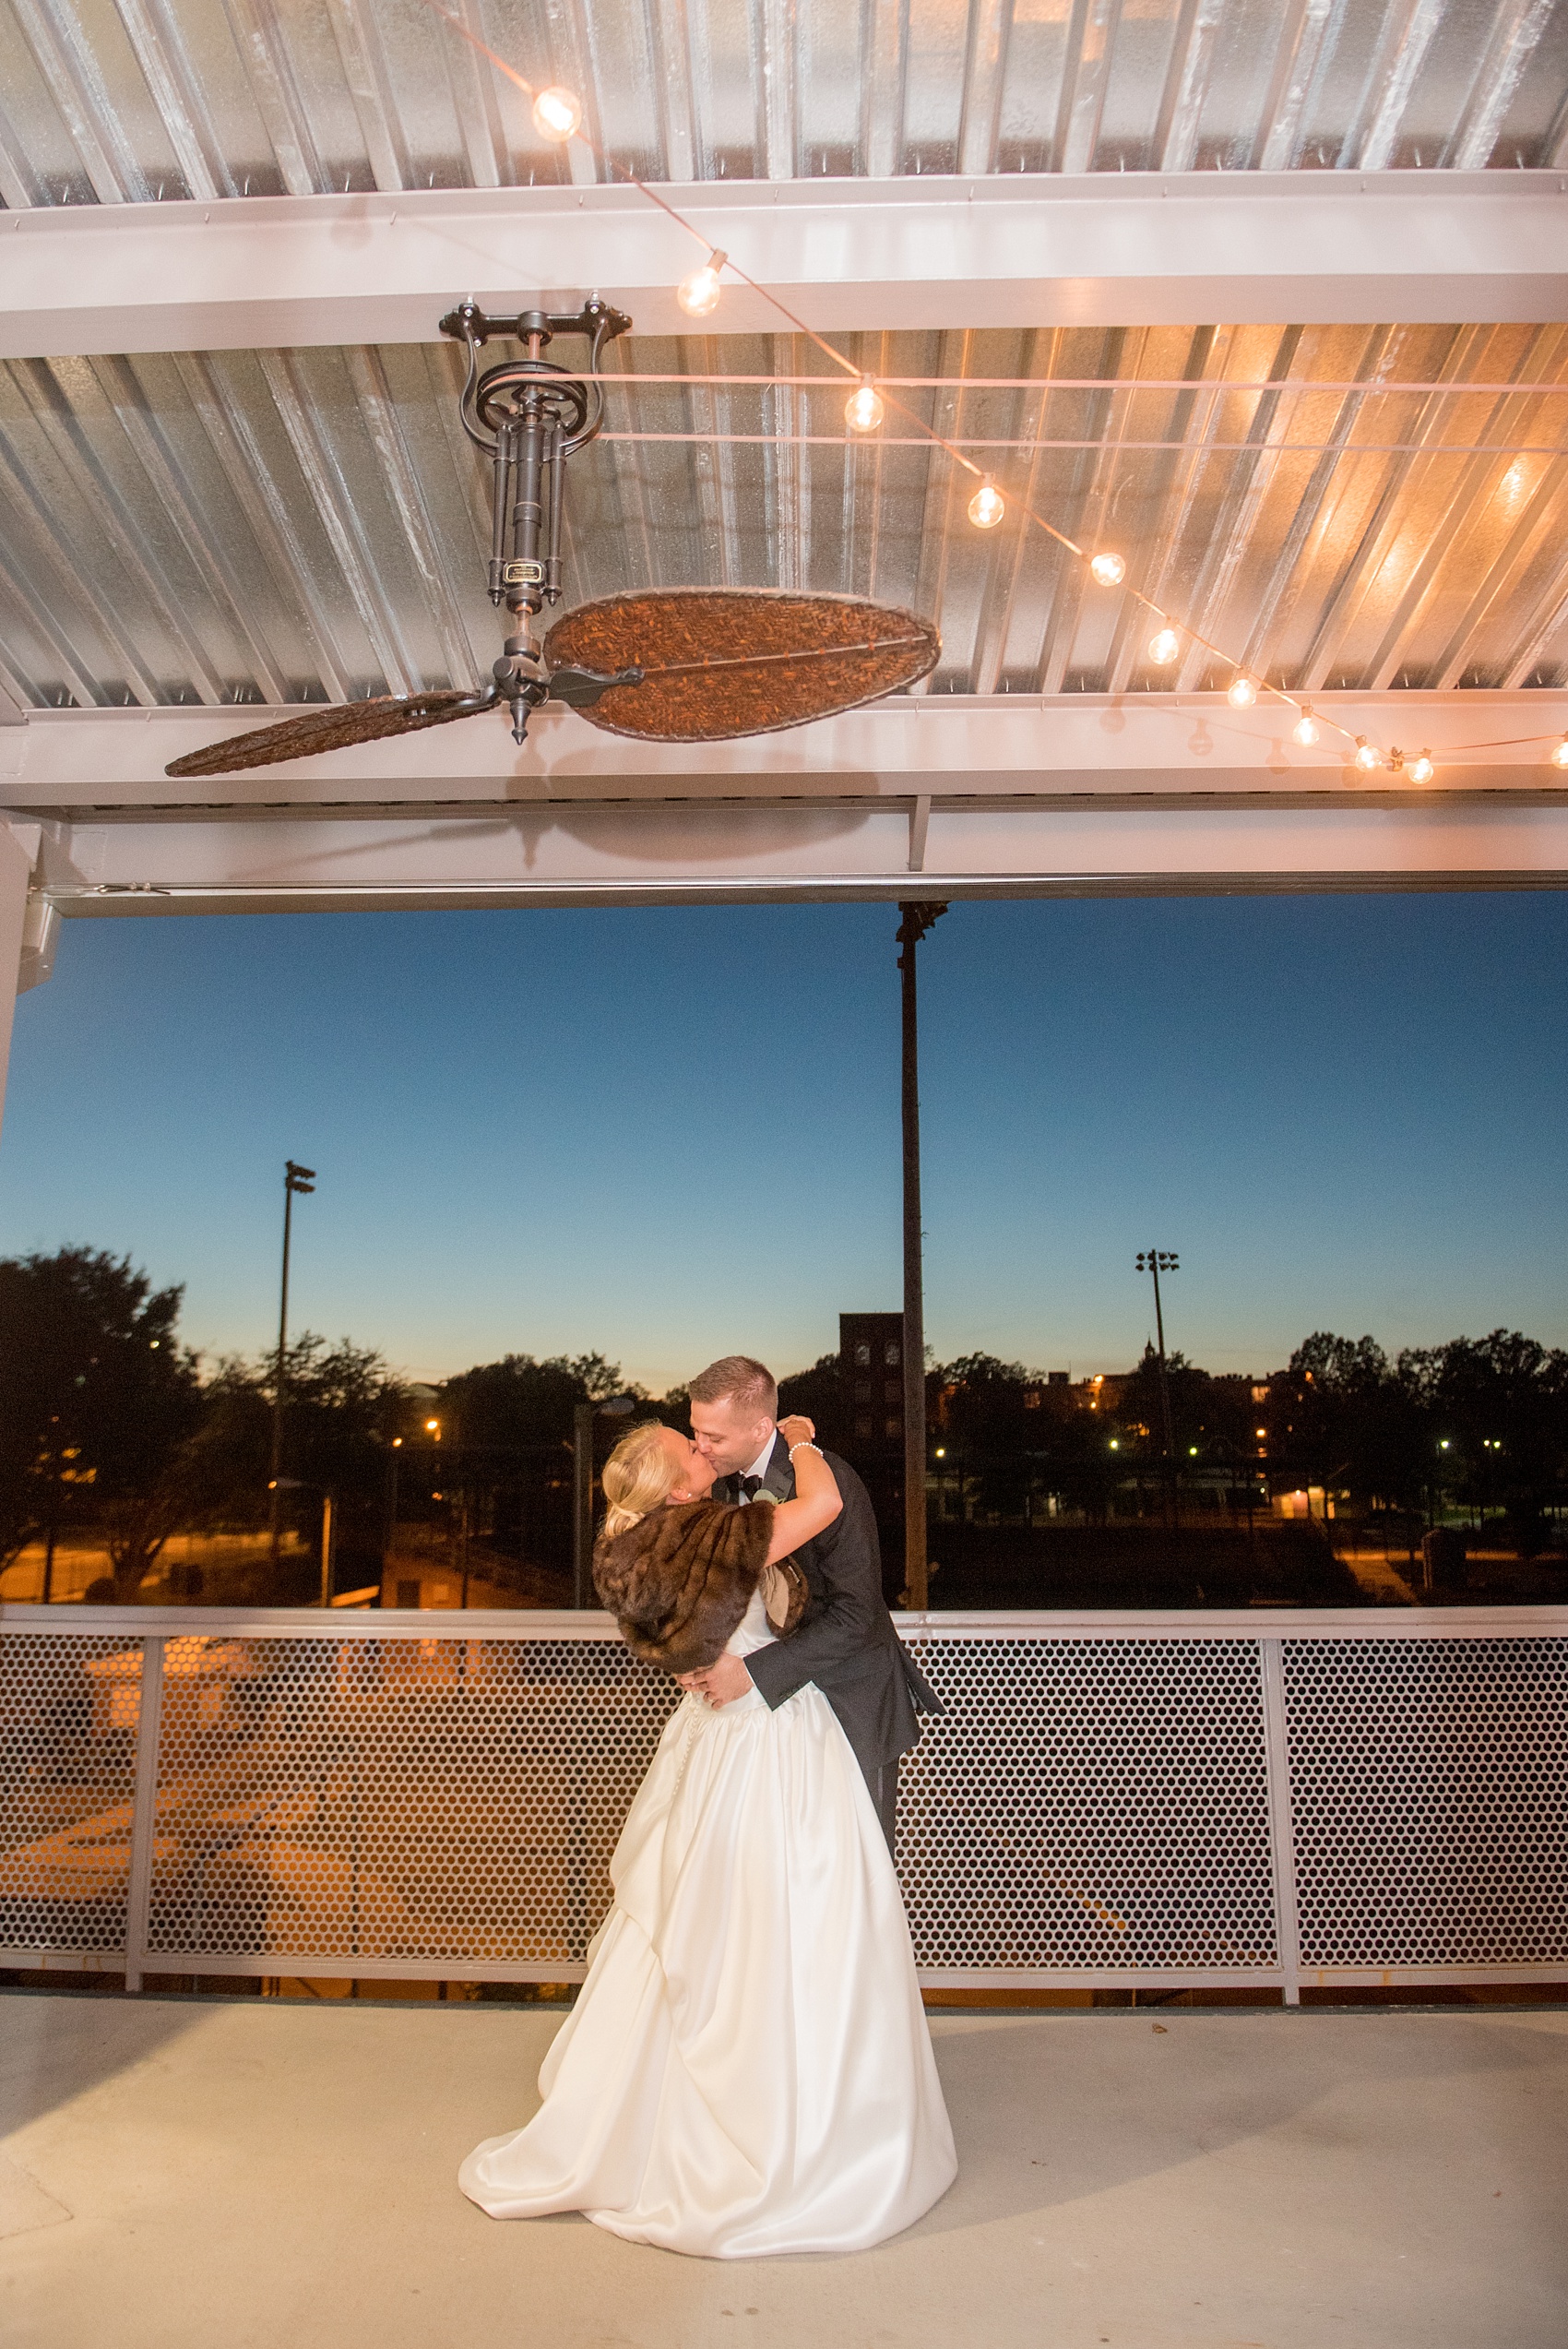 Mikkel Paige Photography photo of a wedding at The Rickhouse, NC. A picture of the bride and groom's outdoor, dusk/twilight last kiss of the night.